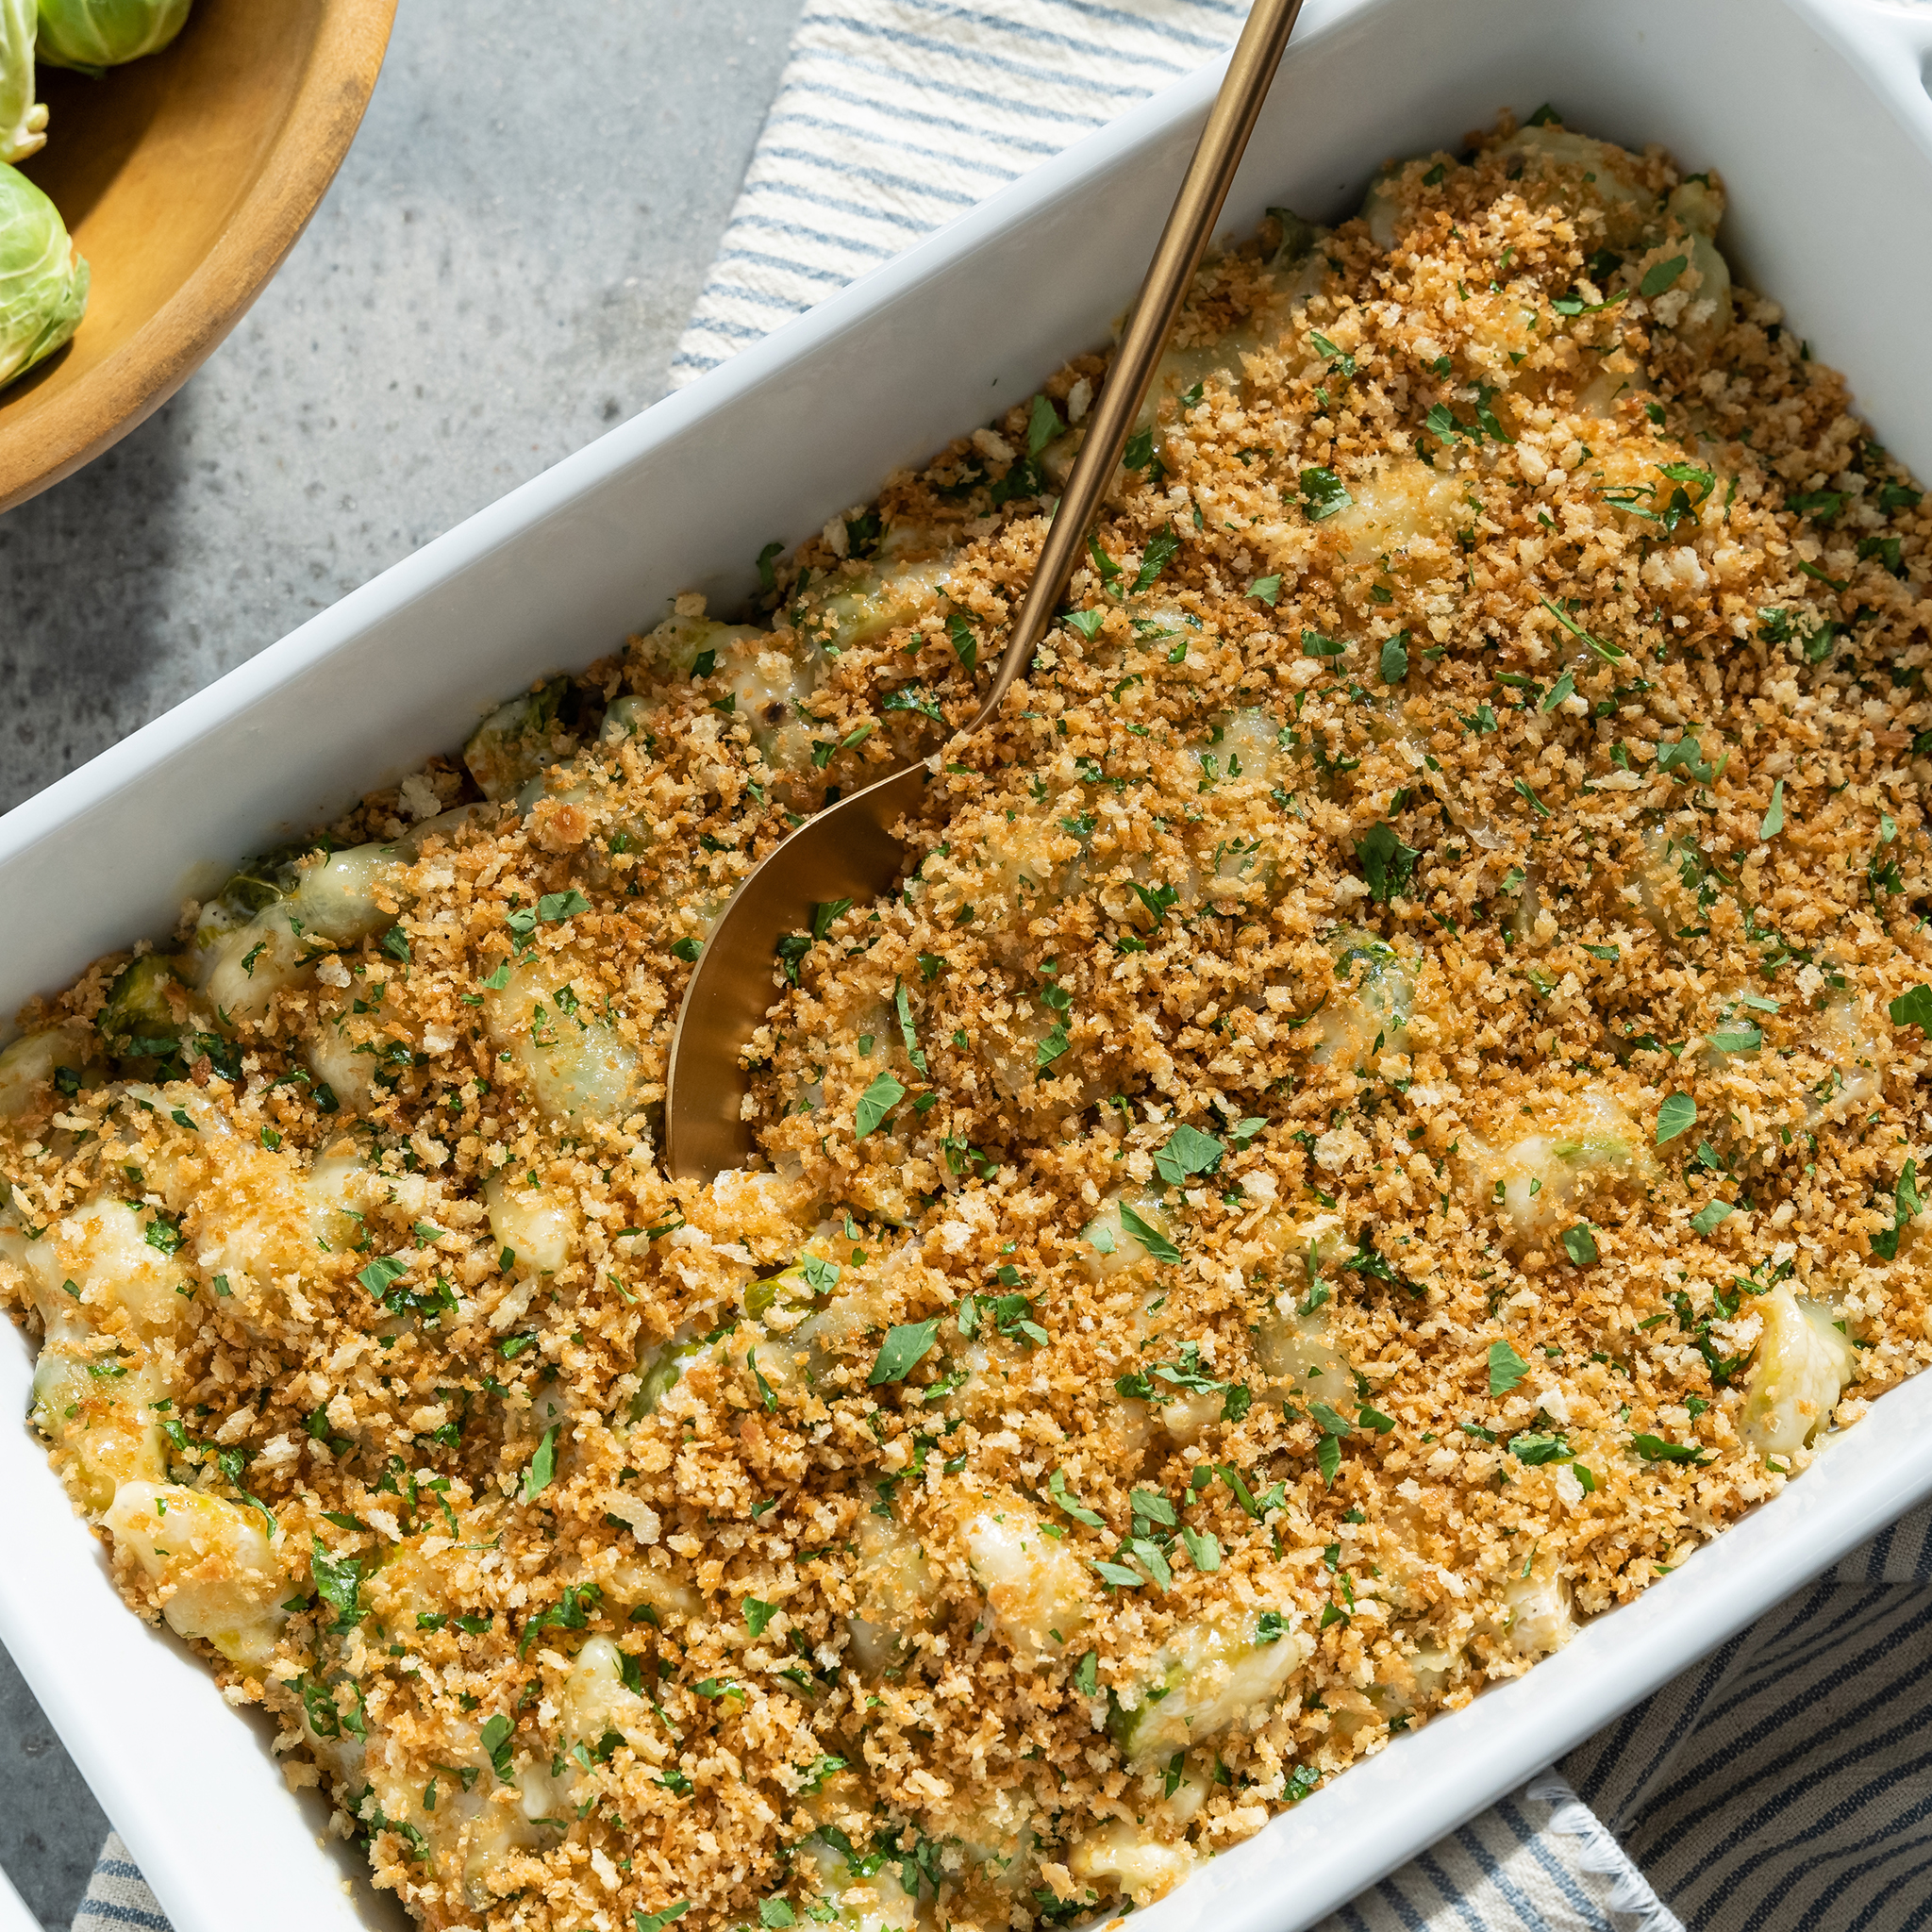 Joanna Gaines' Brussels Sprouts Gratin